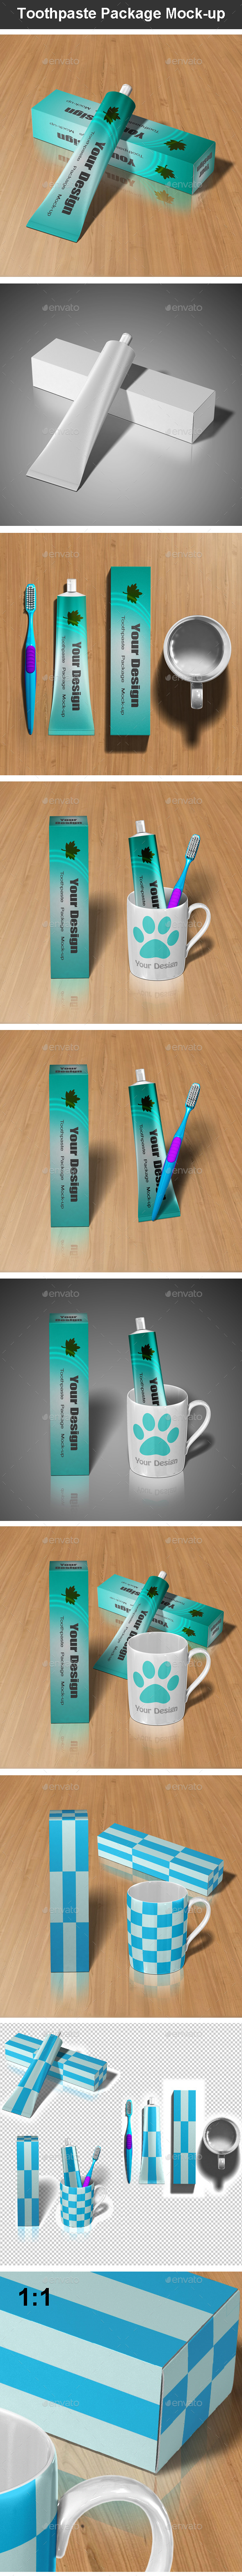 Toothpaste Package Mock-up